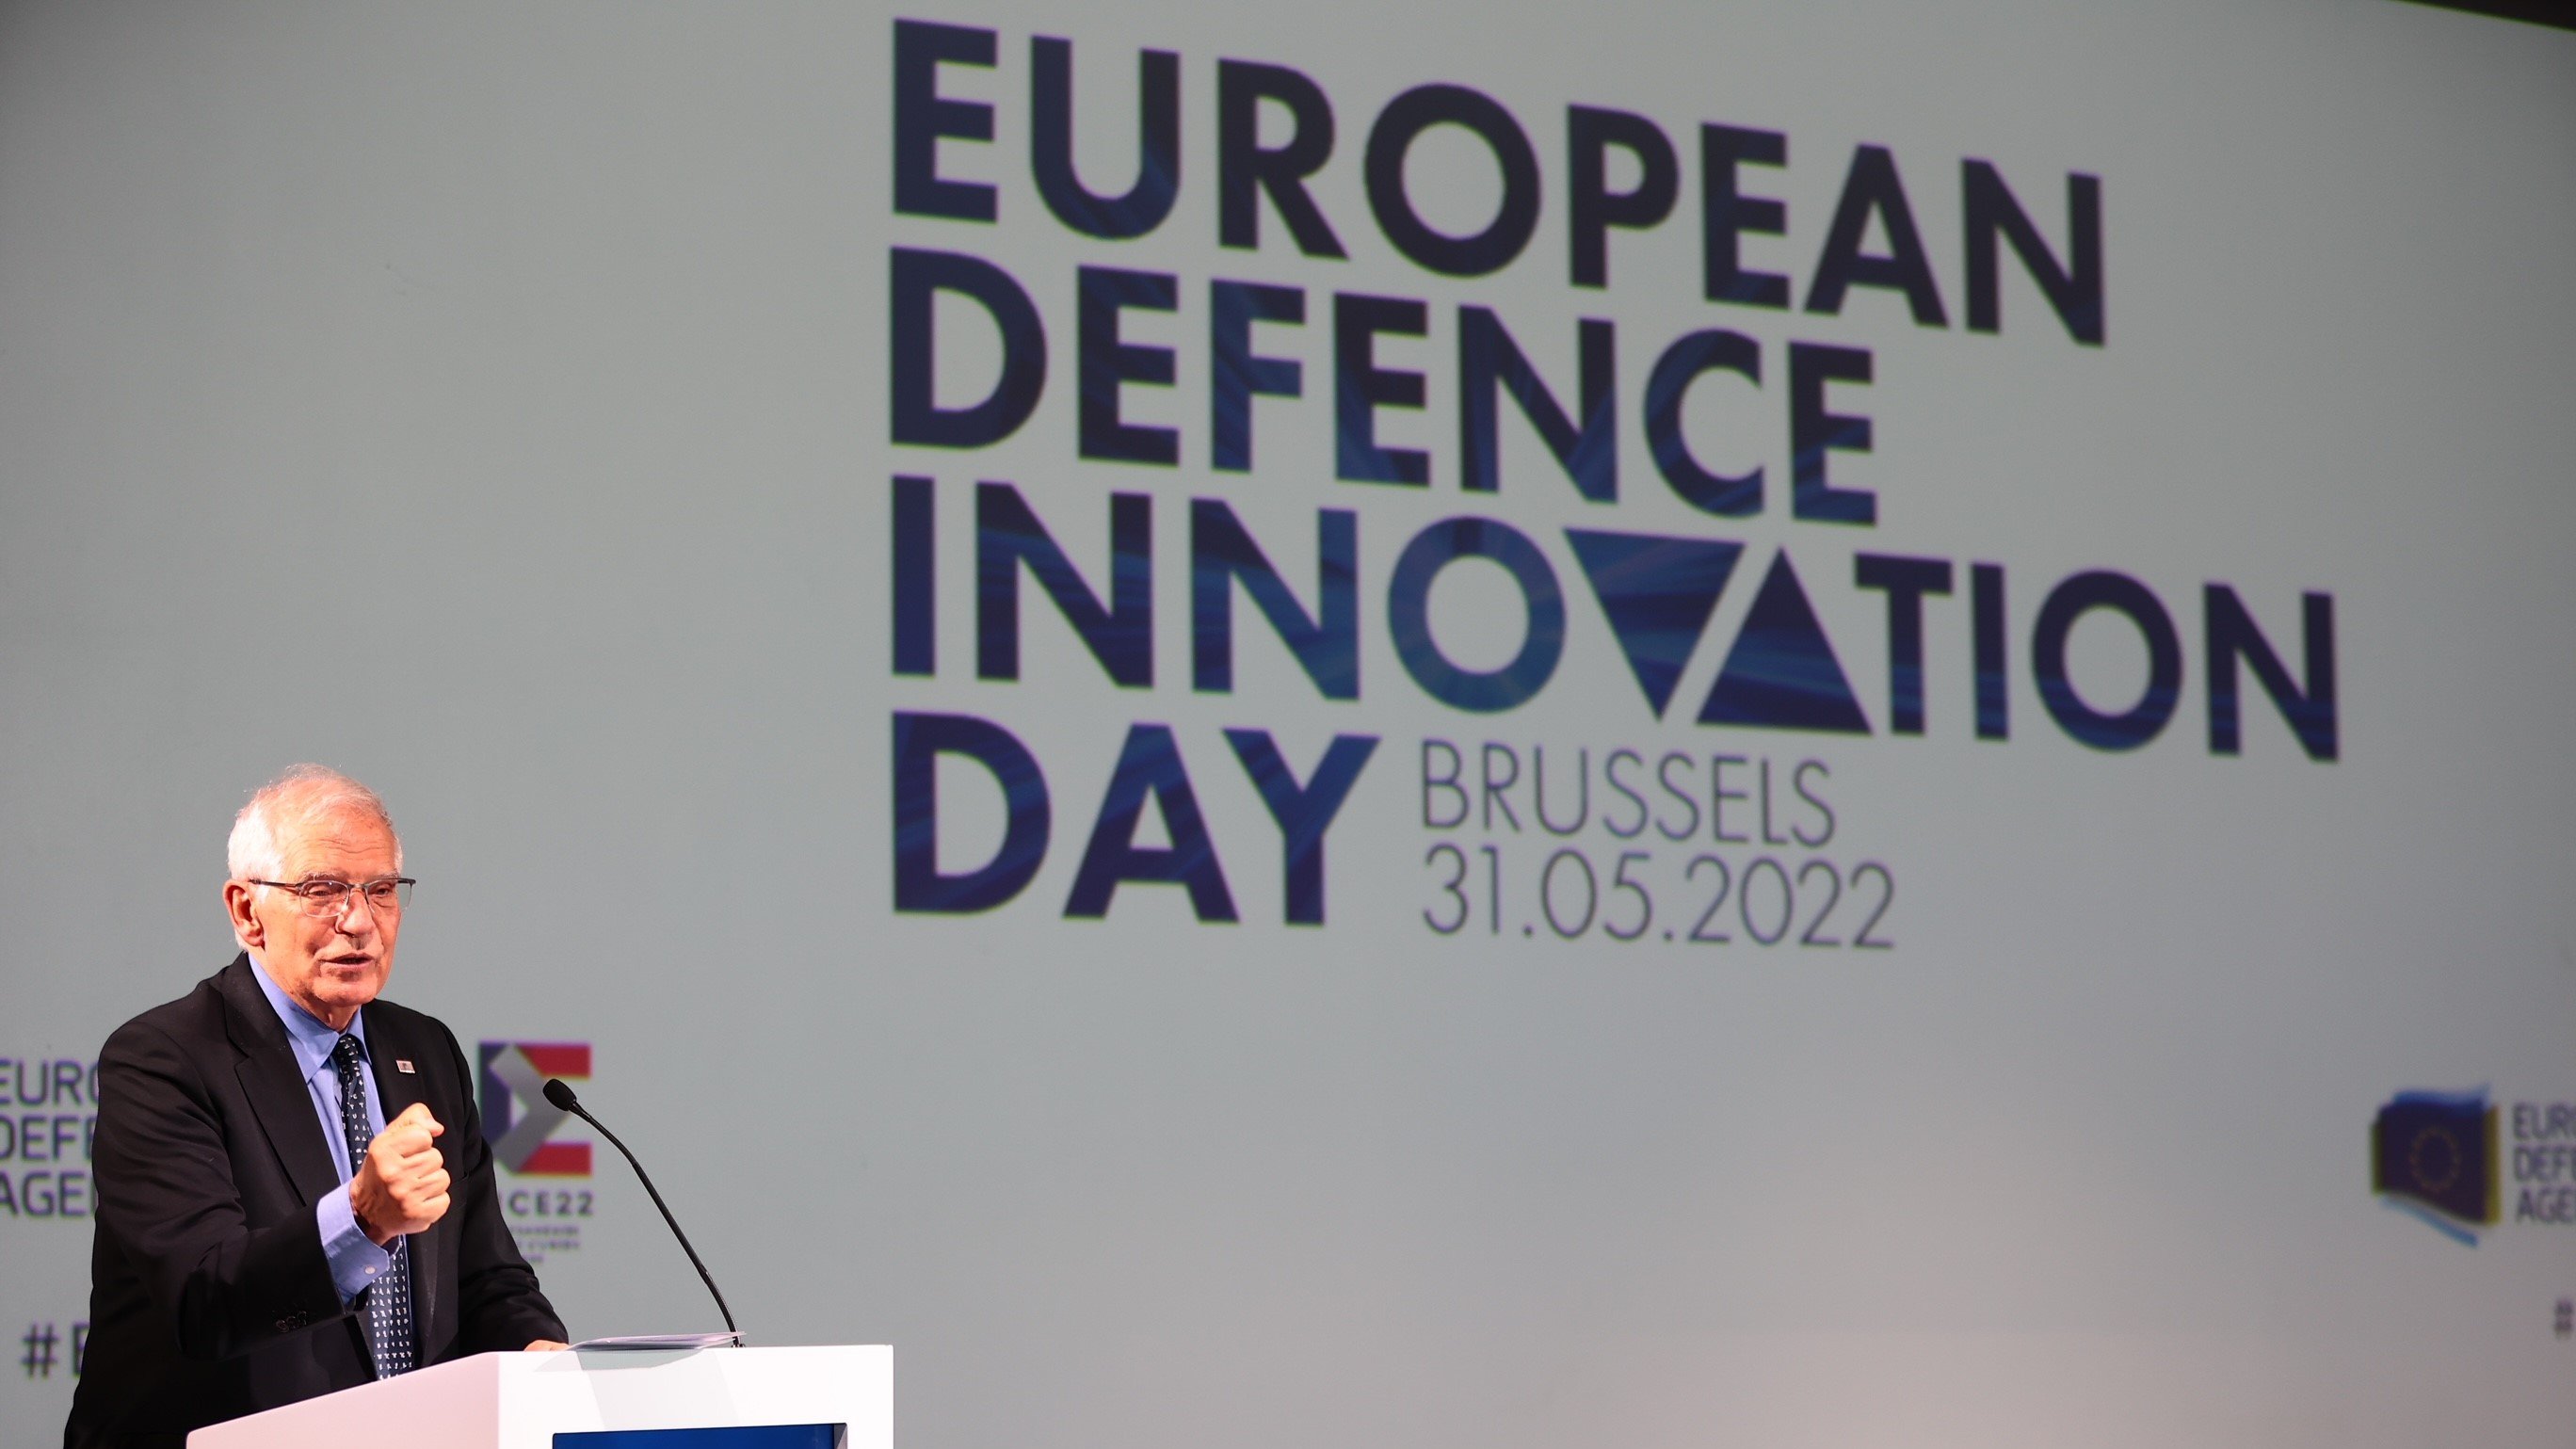 First European Defence Innovation Day Calls for More Investment and Cooperation 